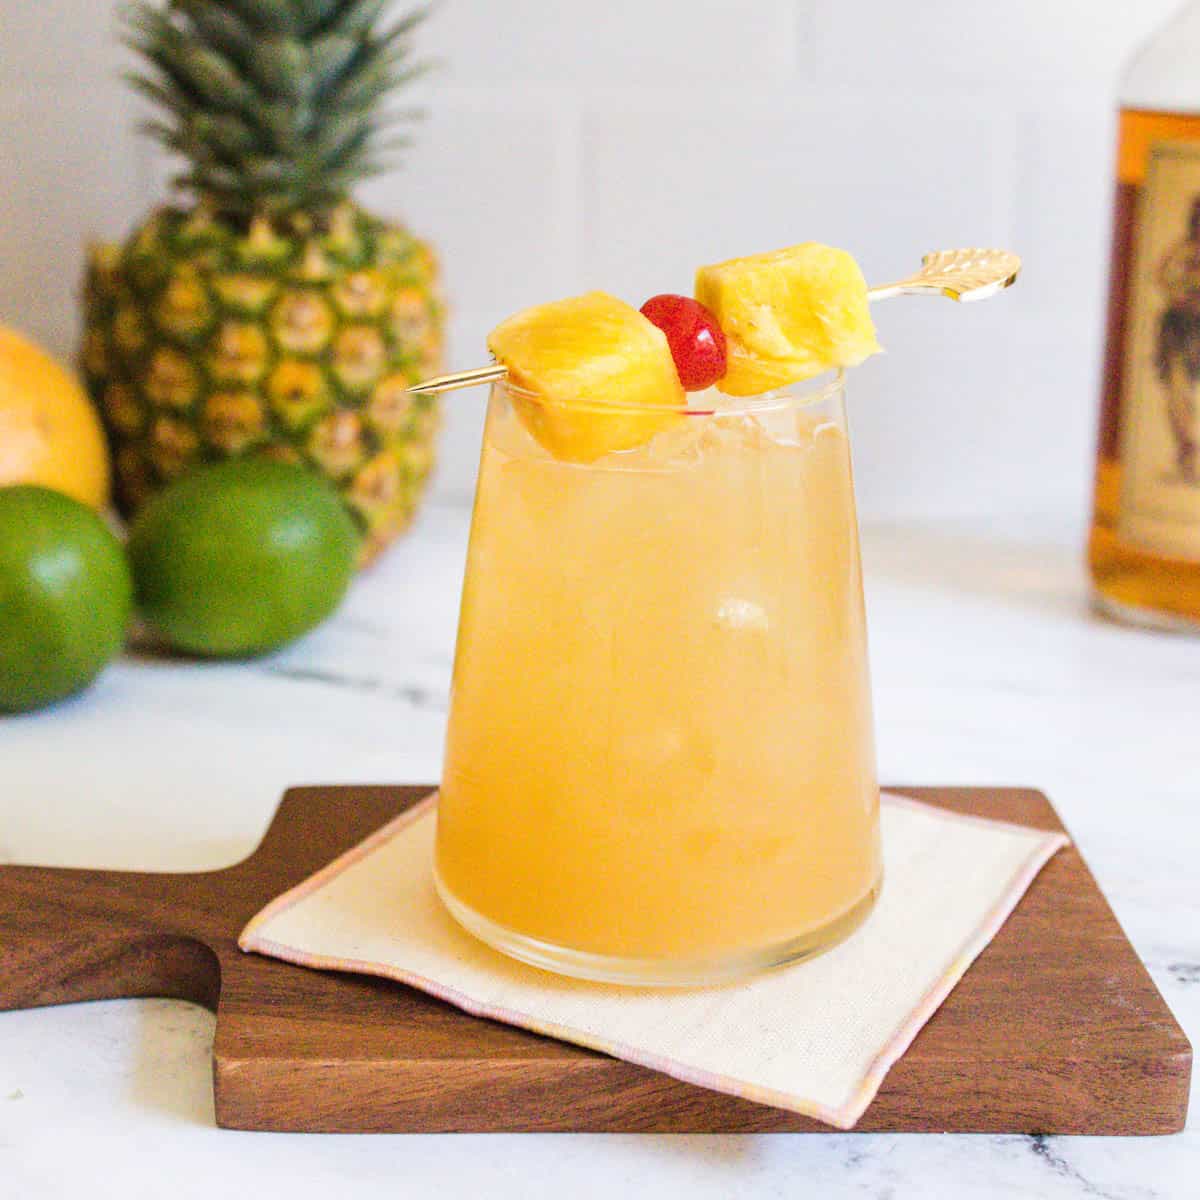 Tropical rum cocktail garnished with a cocktail tick of pineapple chunks and a cocktail cherry.